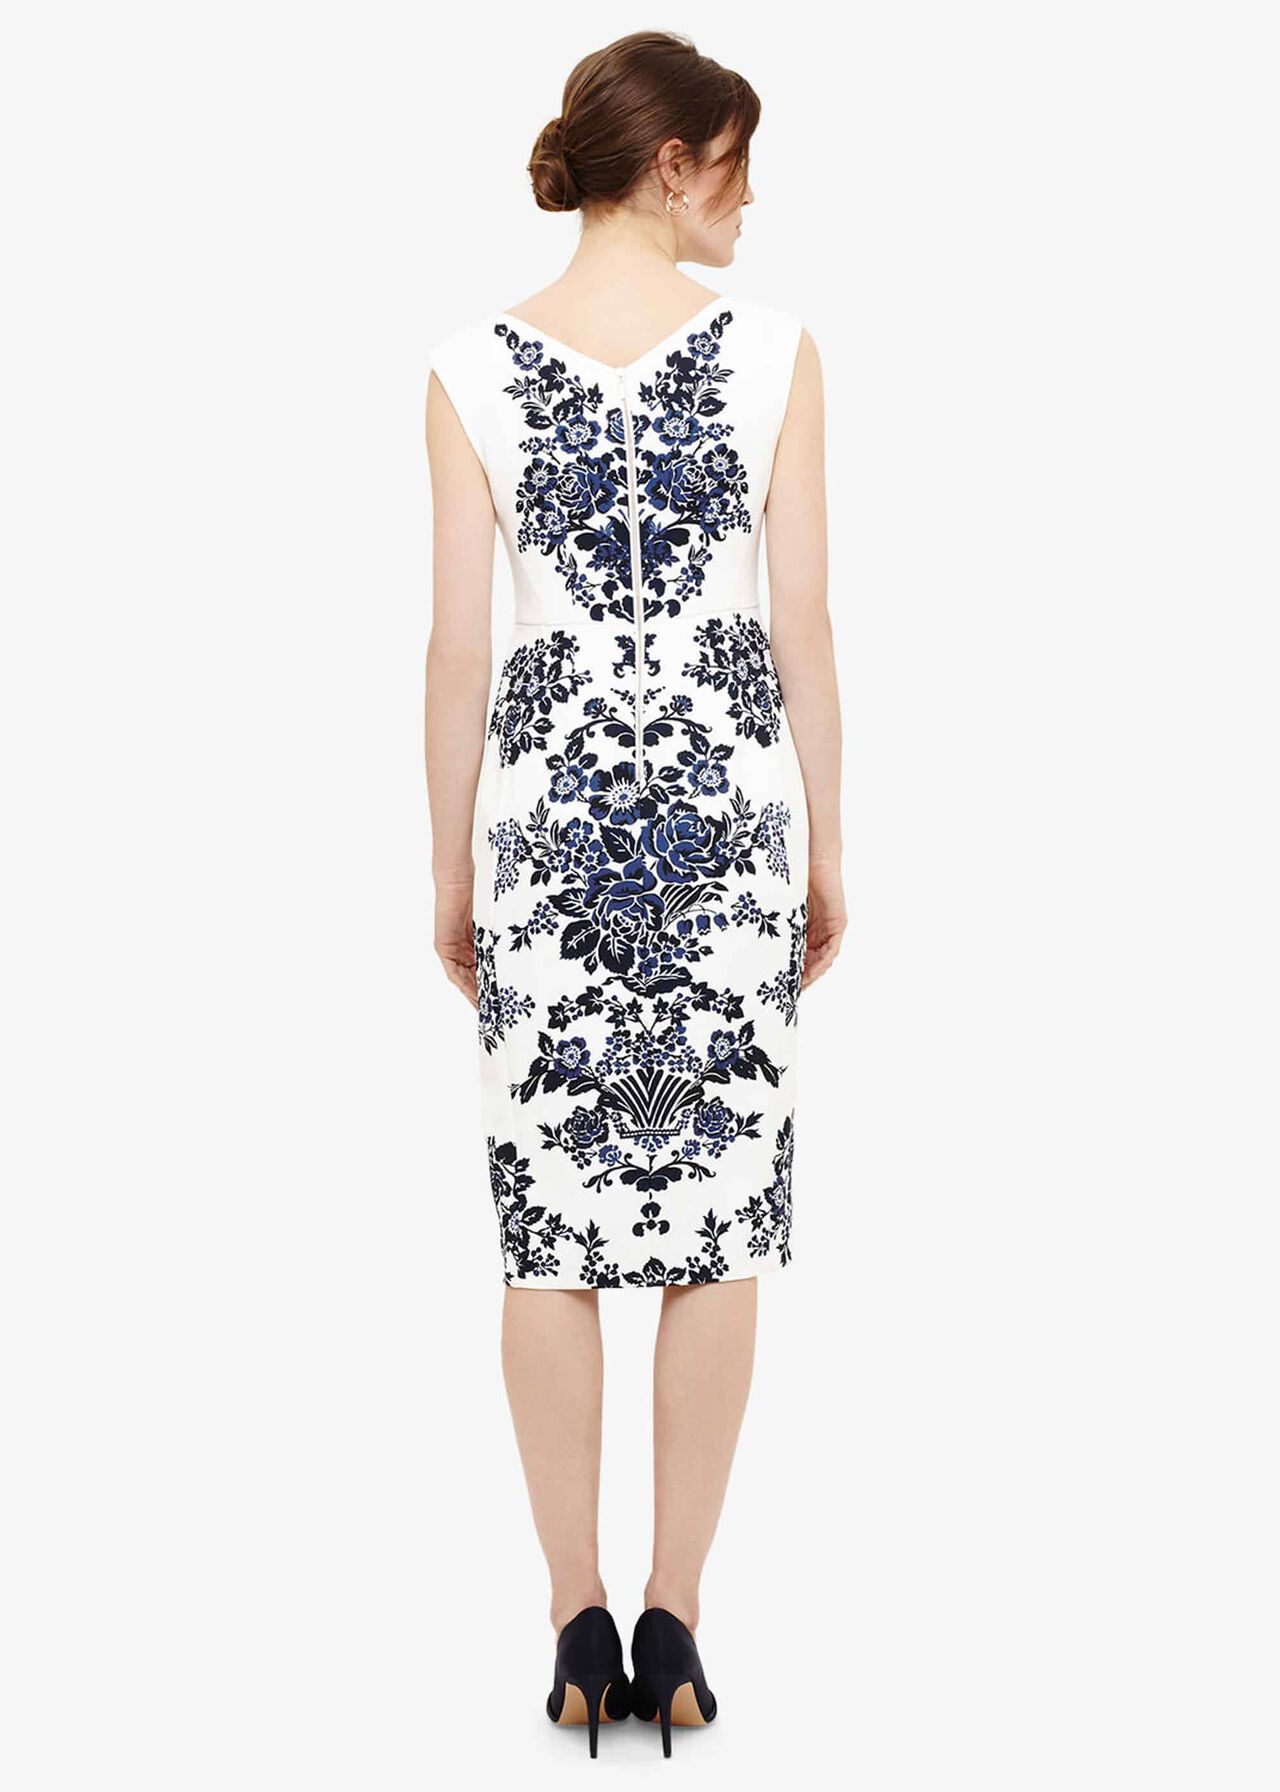 Whitney Placement Print Dress